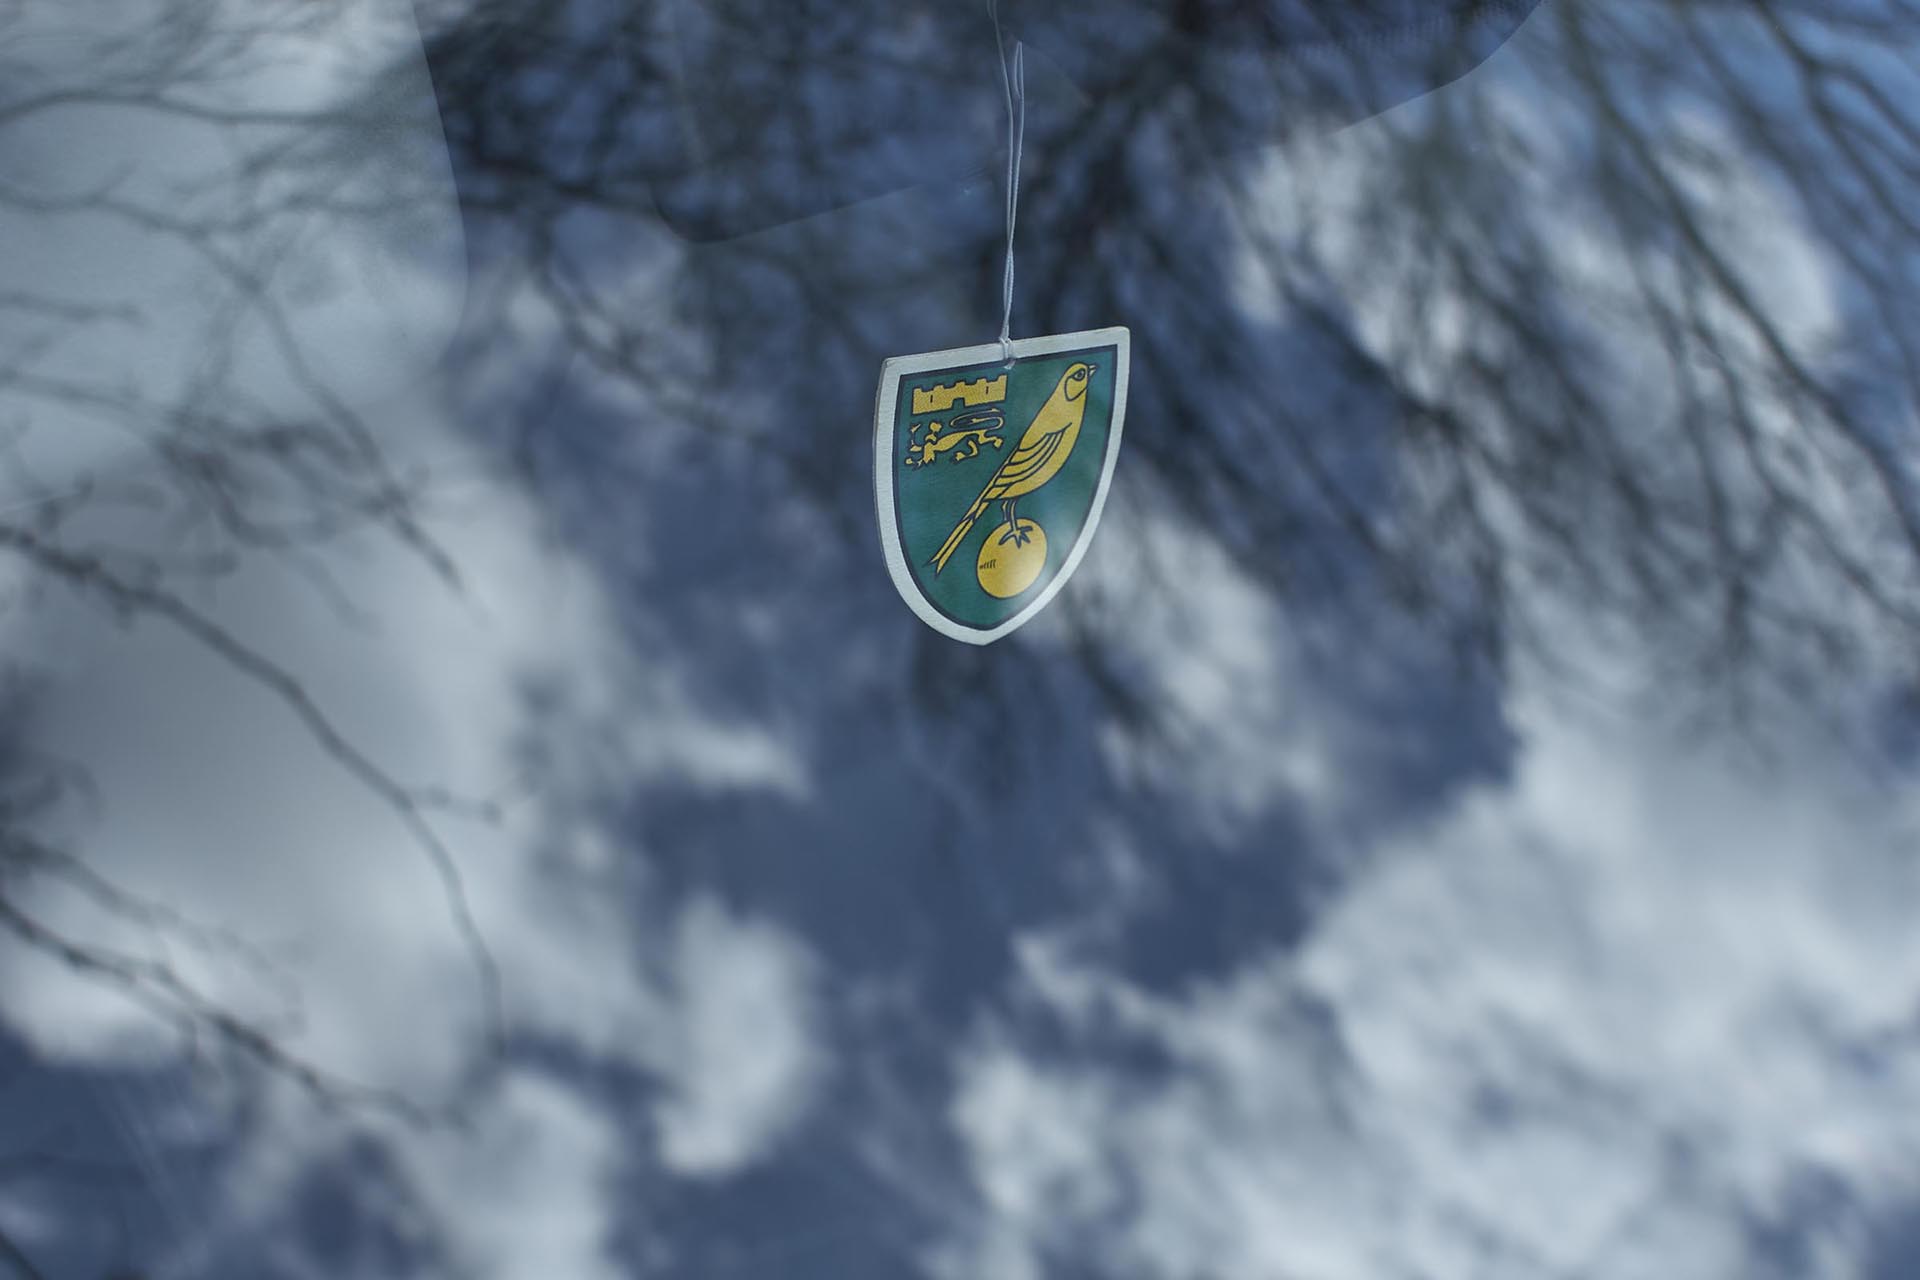 Random objects and places. Norwich Football Club Air Freshener in car windscreen.